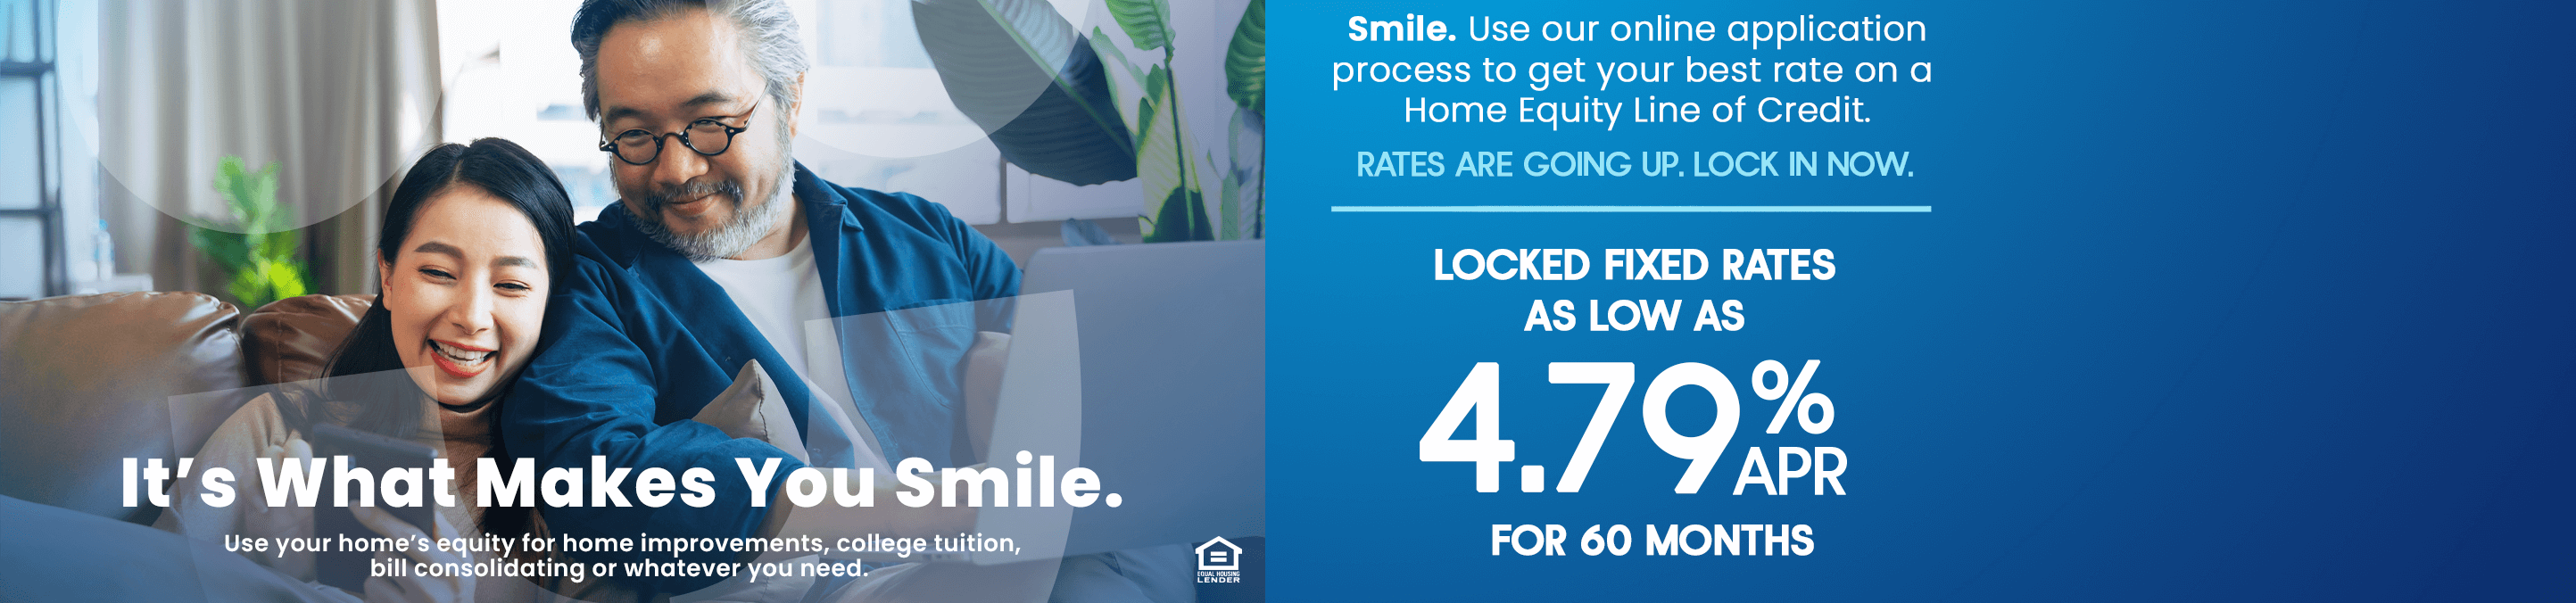 Home equity line of credit. locked fixed rates for 60 months. 4.29%APR with 90% APR LTV.